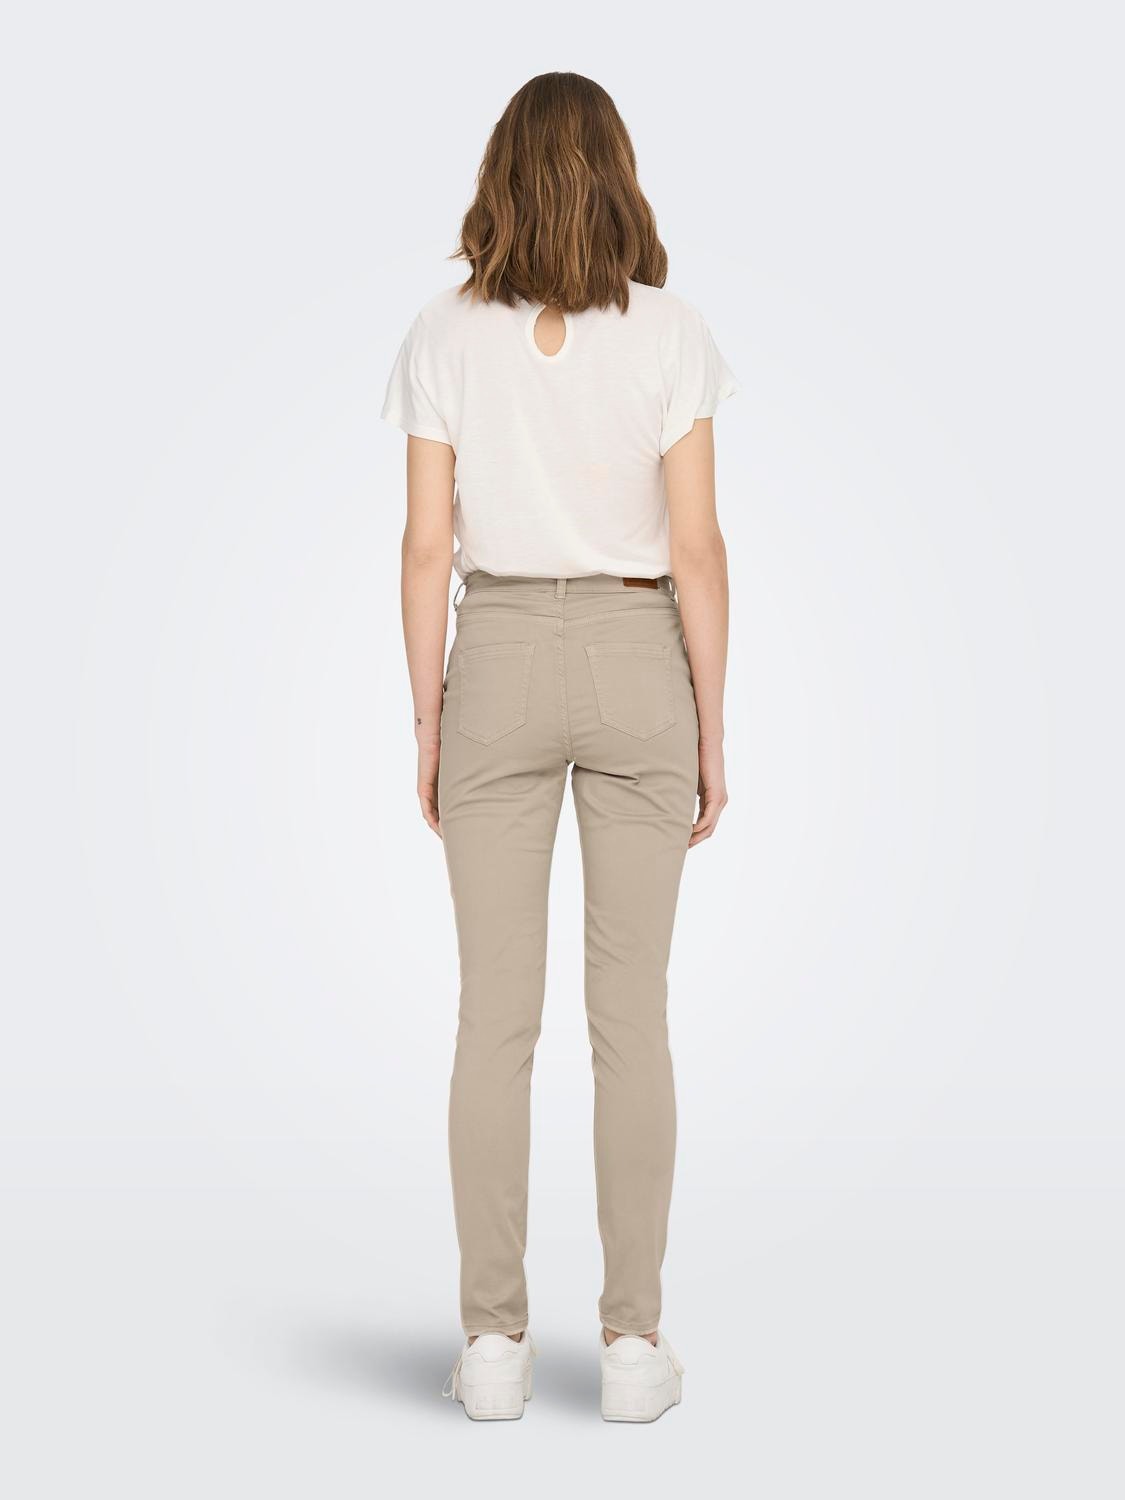 ONLY Normal geschnitten Hohe Taille Hose -Oxford Tan - 15278924